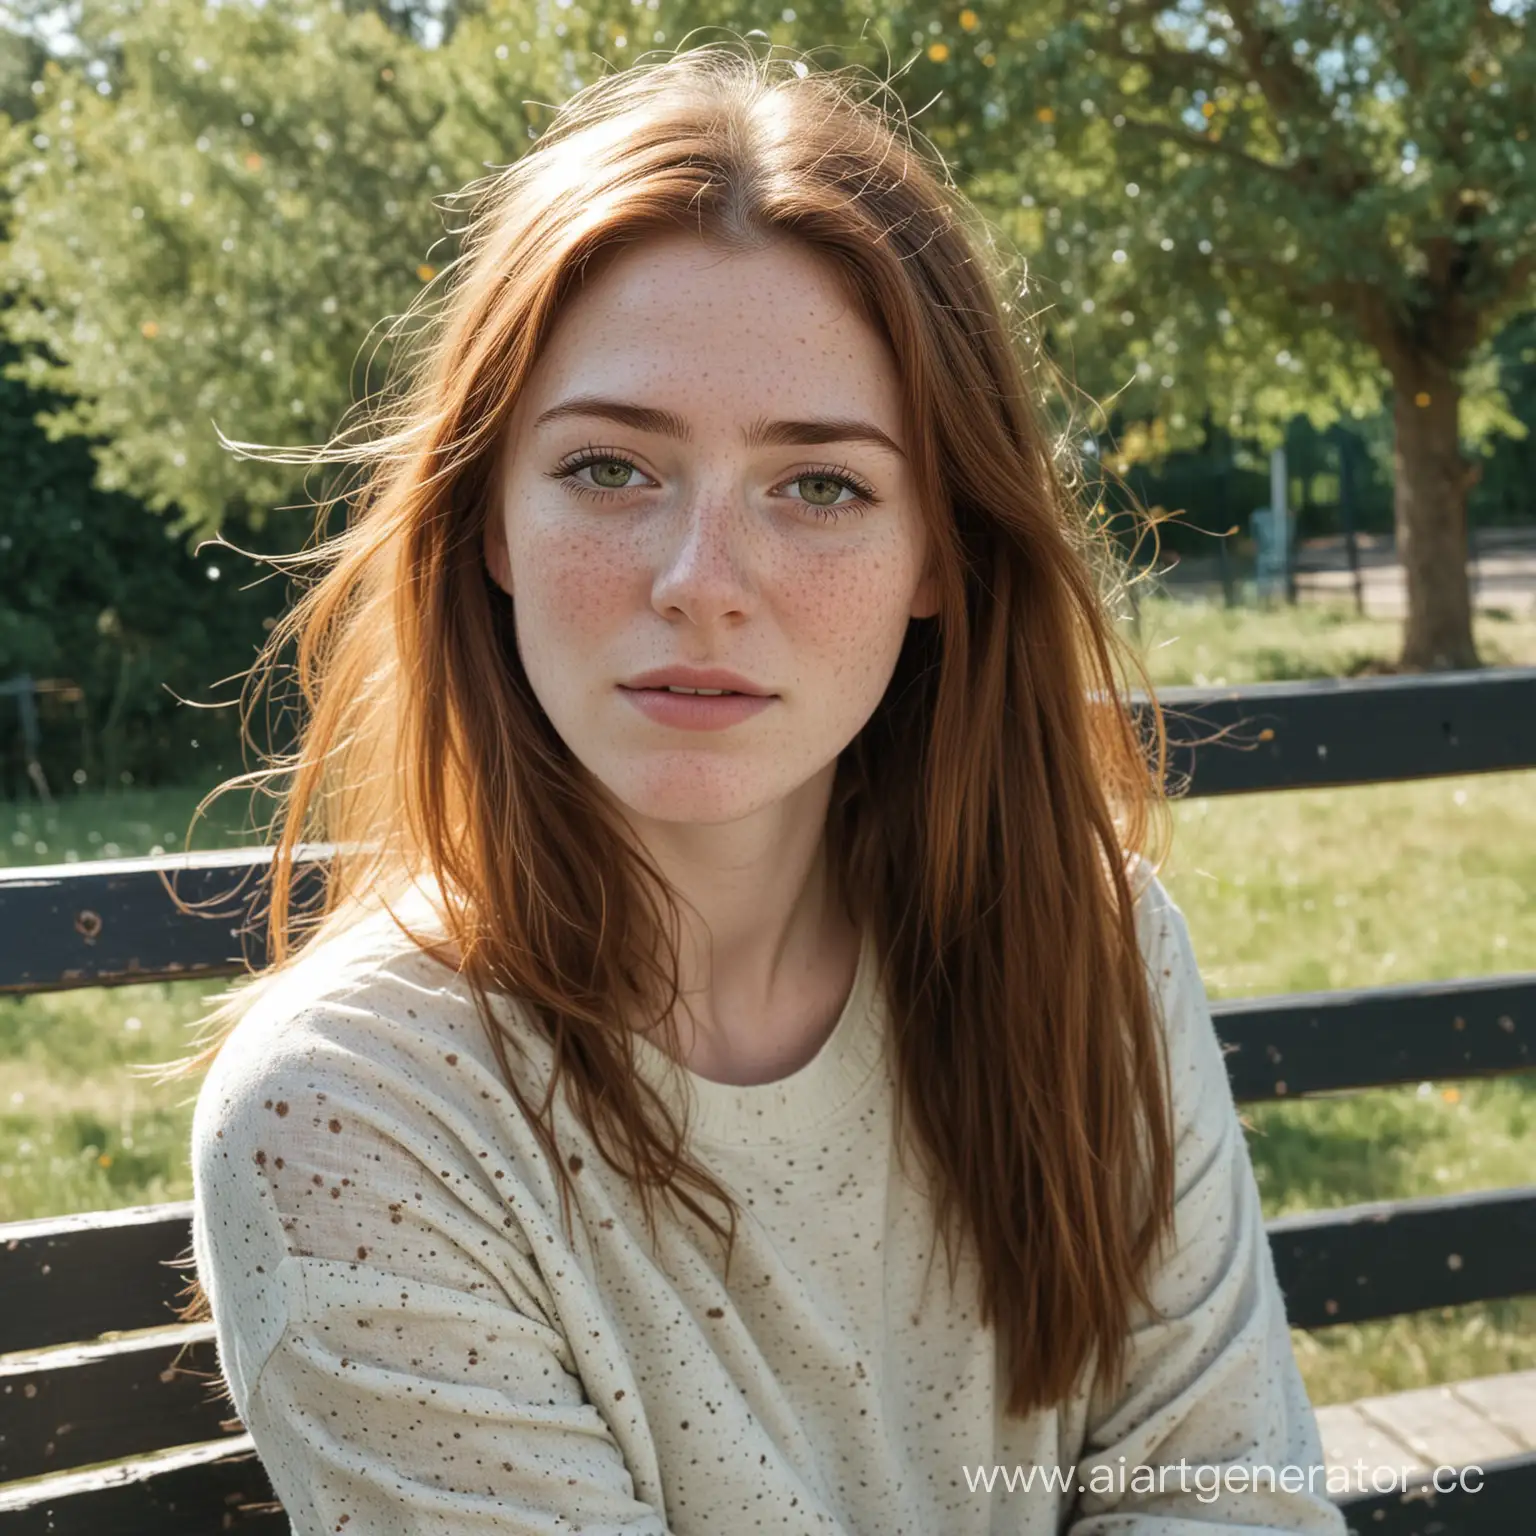 Young-Girl-Sitting-on-Bench-with-Freckled-Face